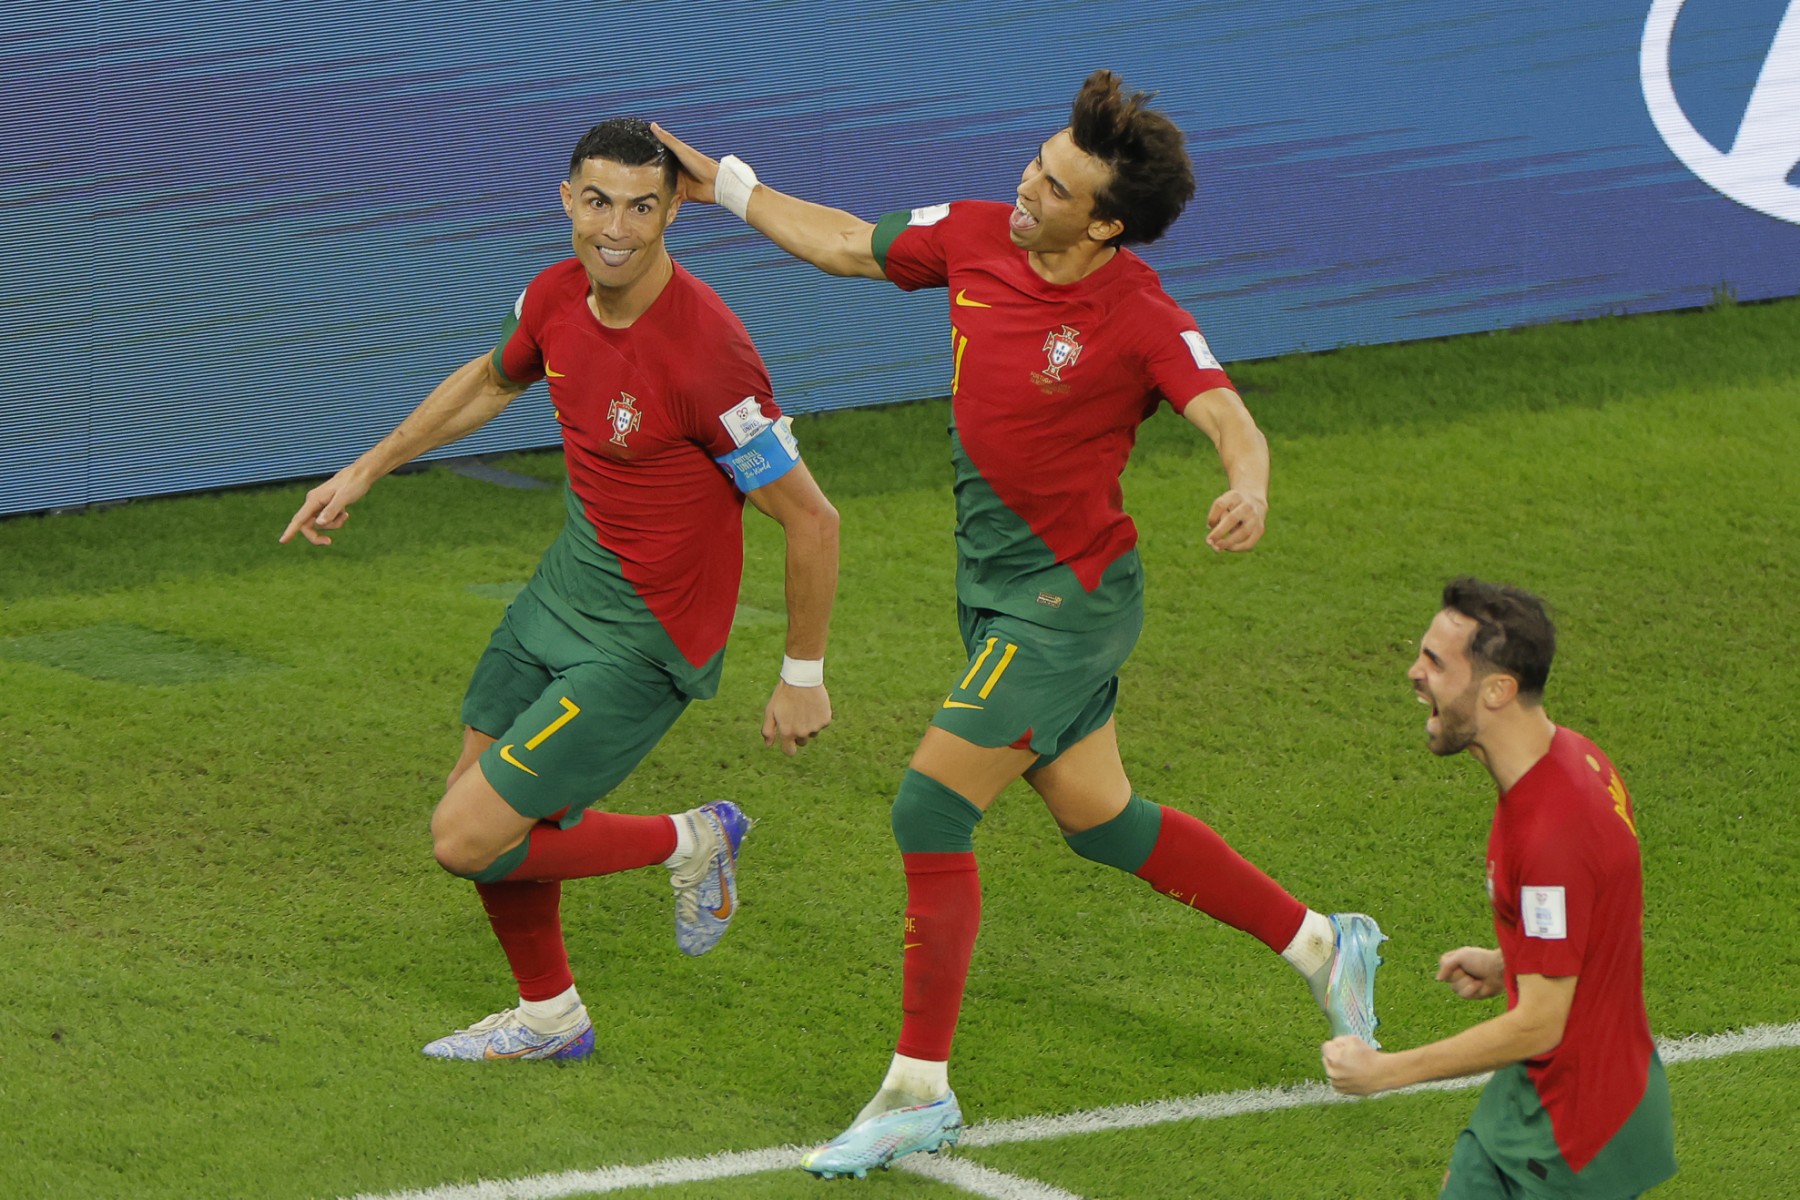 Portugal's forward, Cristiano Ronaldo, celebrates with Portugal's forward #11 Joao Felix and Portugal's midfielder #10 Bernardo Silva after scoring his team's first goal from the penalty spot during the Qatar 2022 World Cup Group H football match between Portugal and Ghana at Stadium 974 in Doha on November 24, 2022. (Photo by Odd ANDERSEN / AFP)